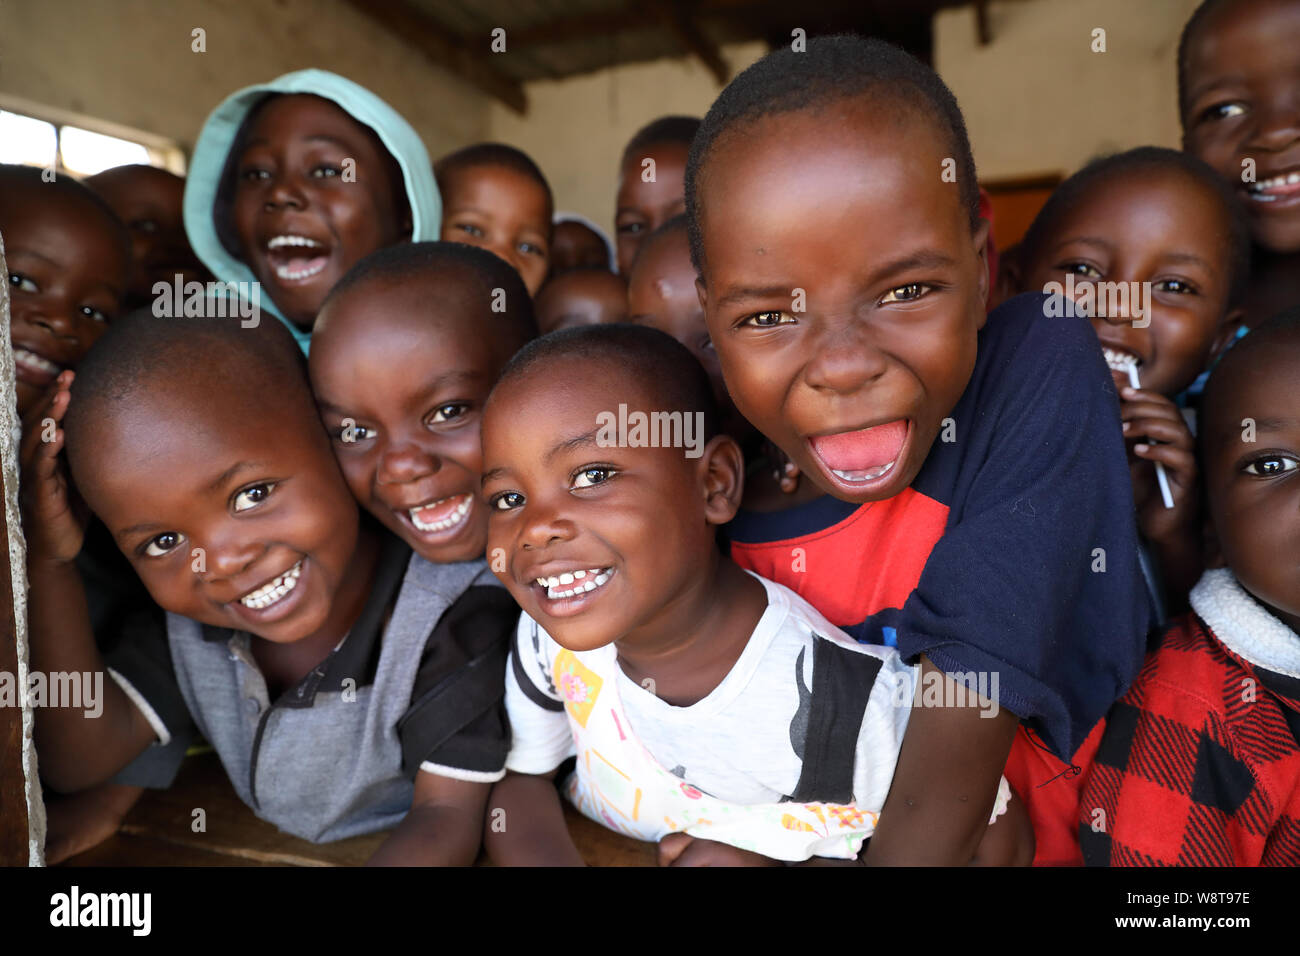 Students at the window of a primary school in Nkhotakota, Malawi. Malawi is one of the poorest countries in the world. Stock Photo